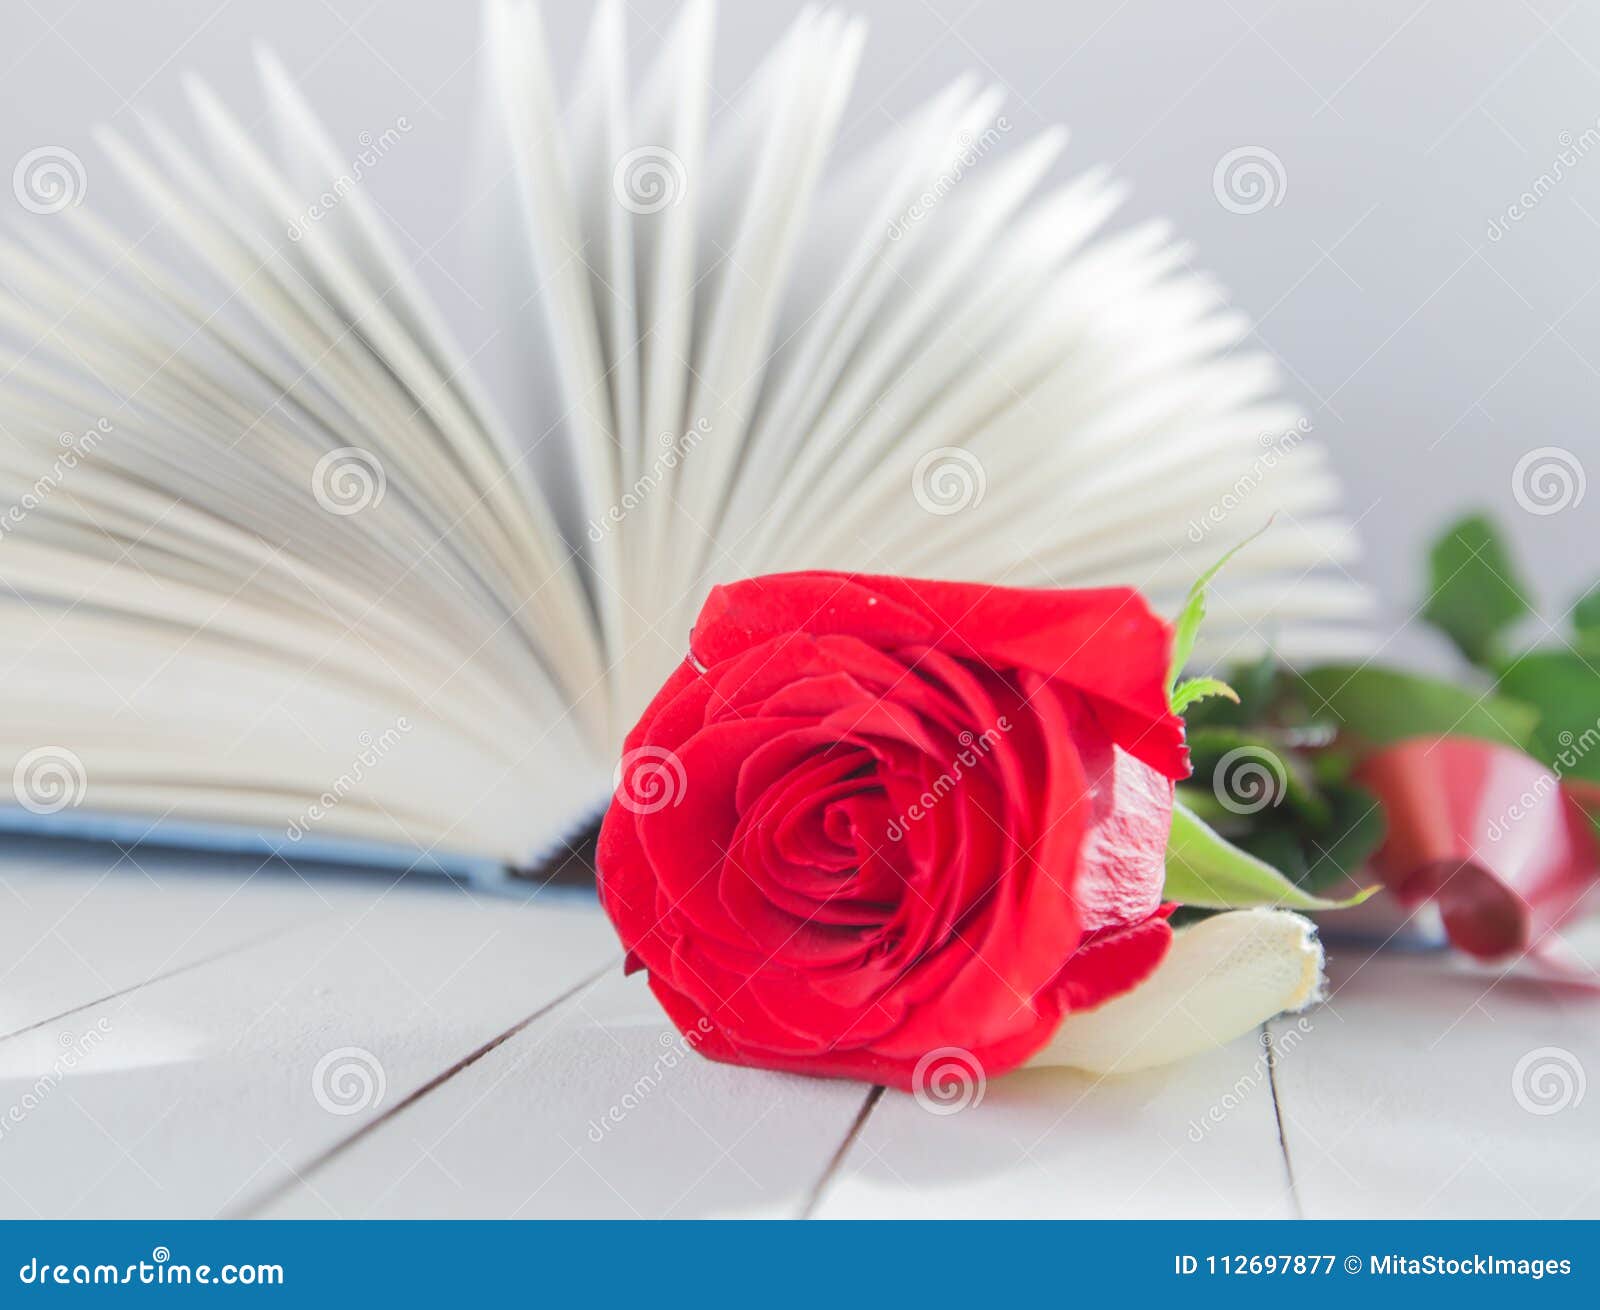 Rose and Book romance love stock image. Image of page - 112697877